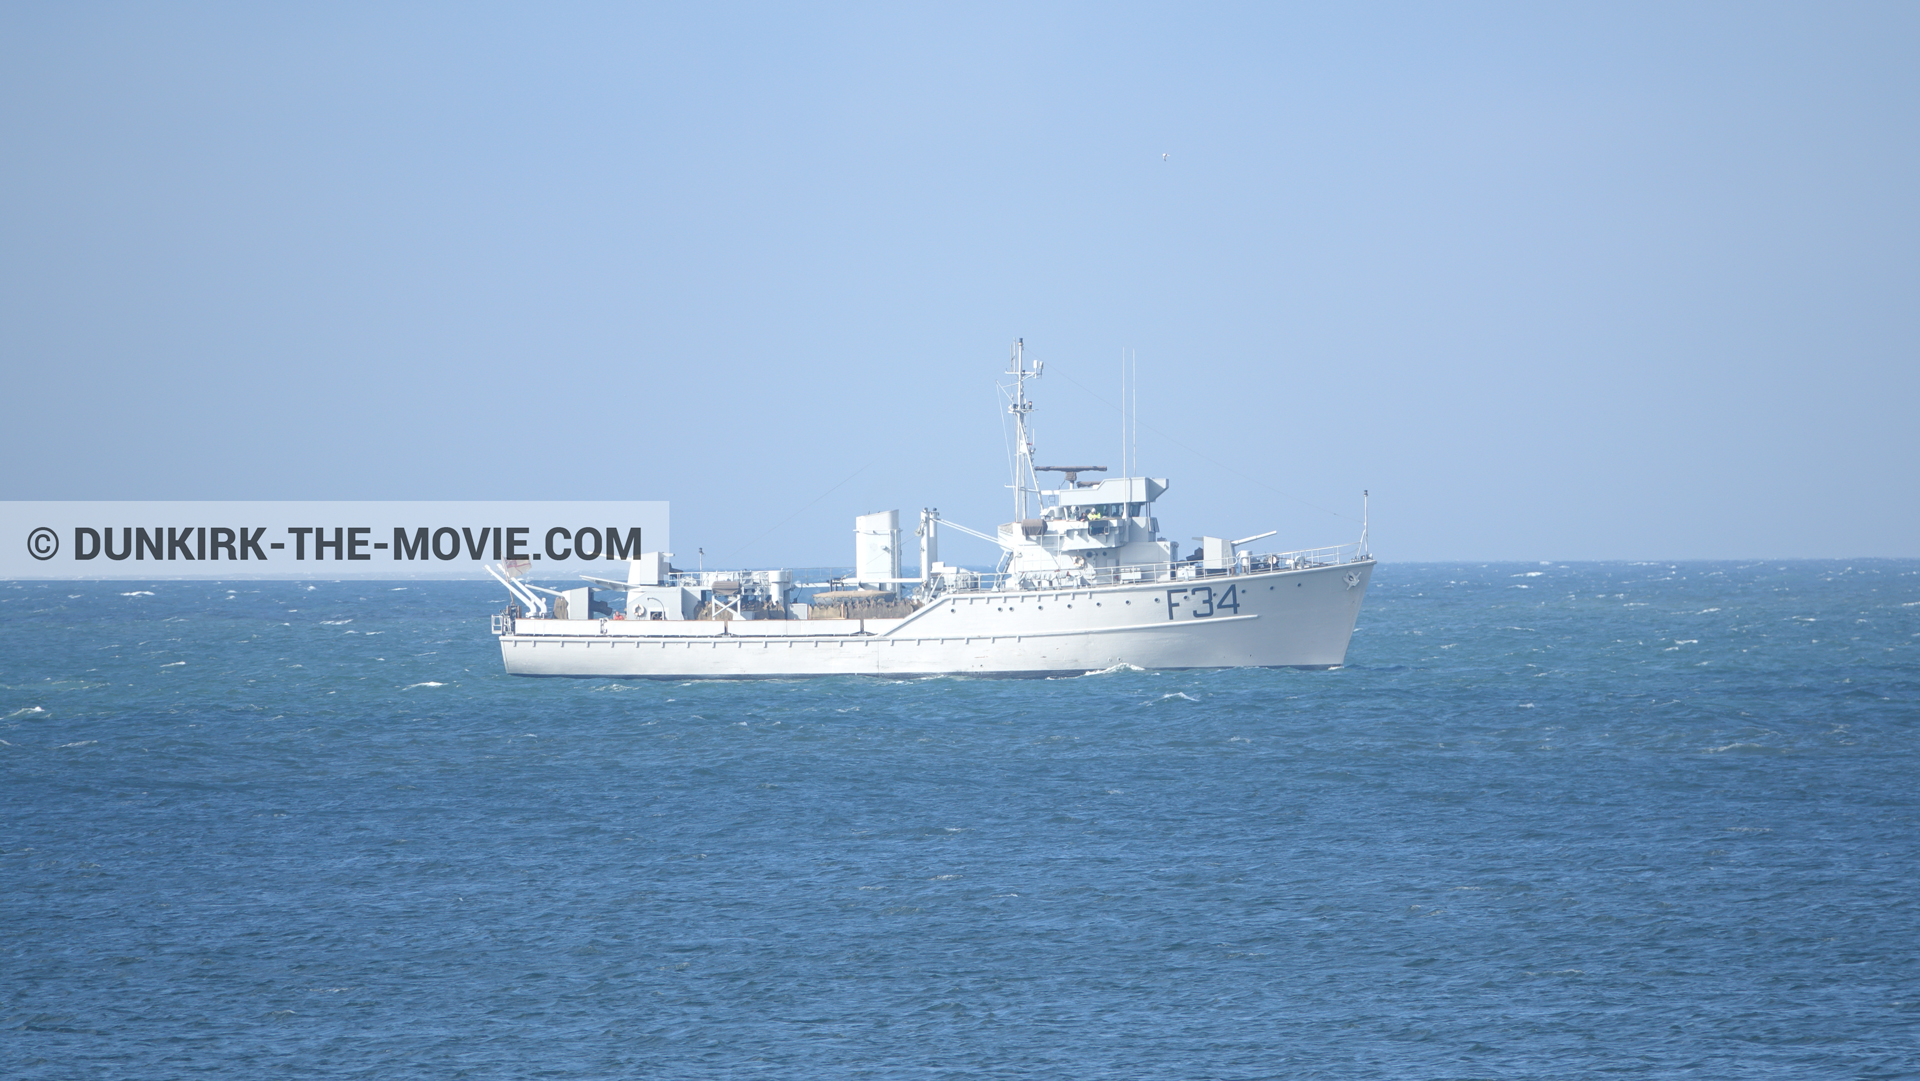 Picture with blue sky, F34 - Hr.Ms. Sittard, calm sea,  from behind the scene of the Dunkirk movie by Nolan